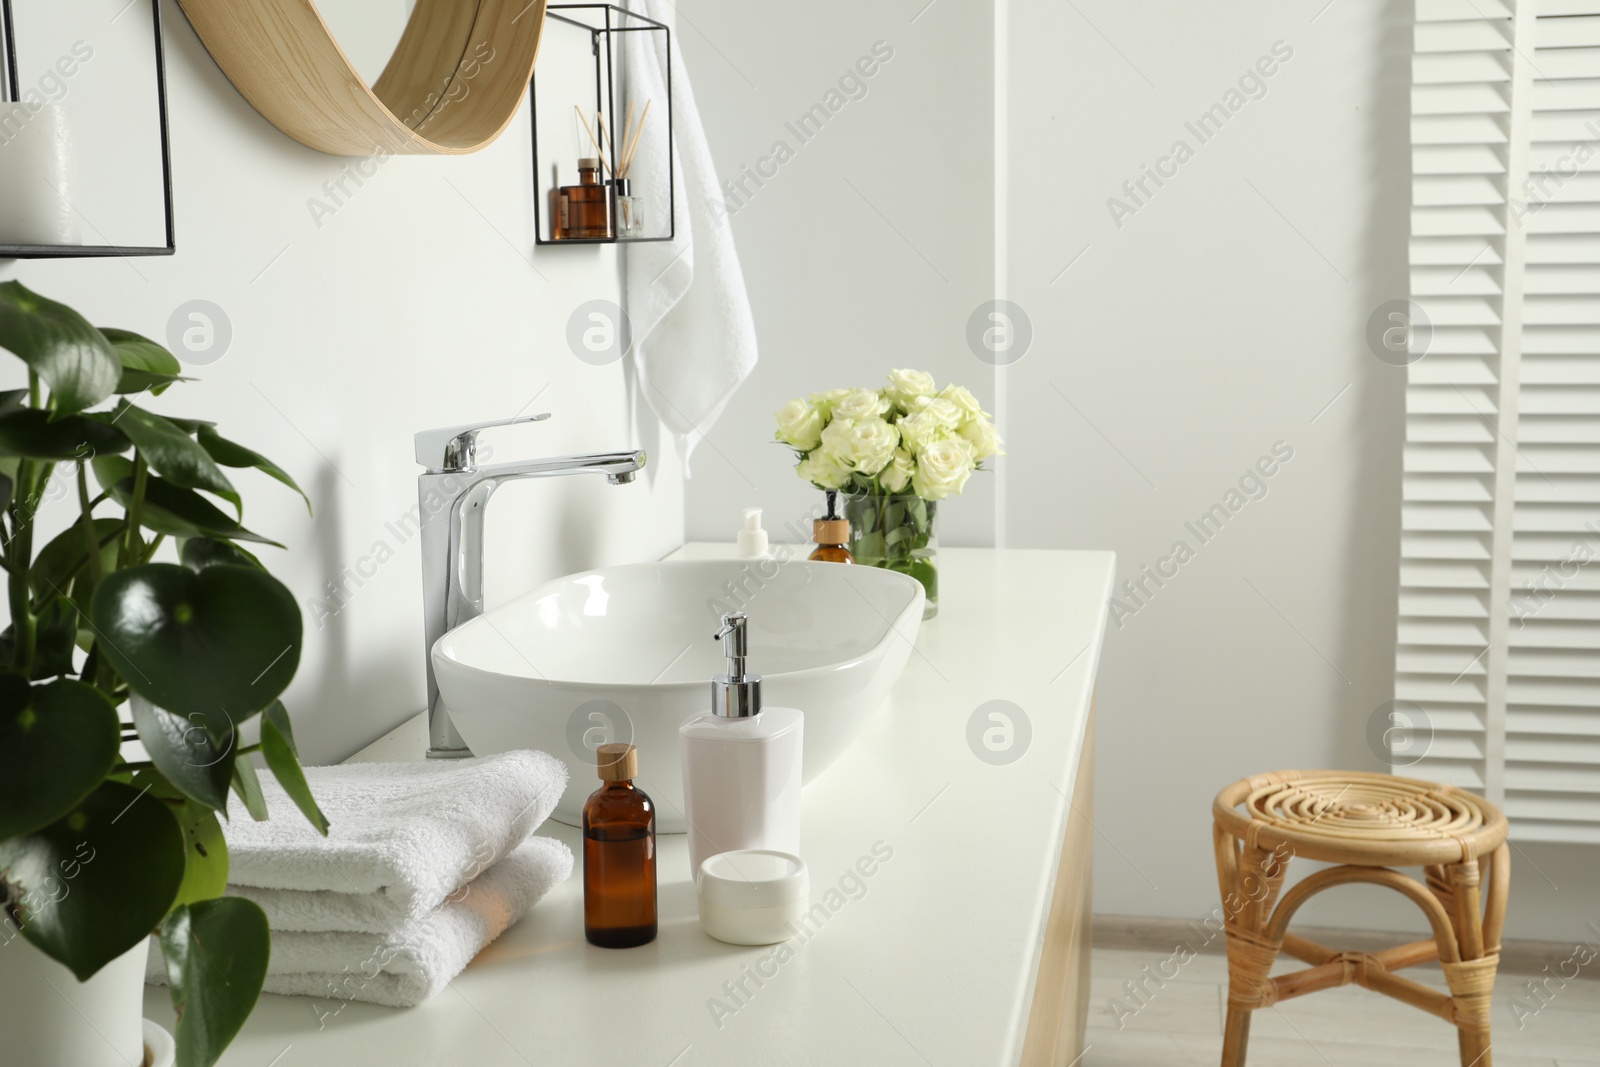 Photo of Houseplant, bath accessories, sink and roses in bathroom